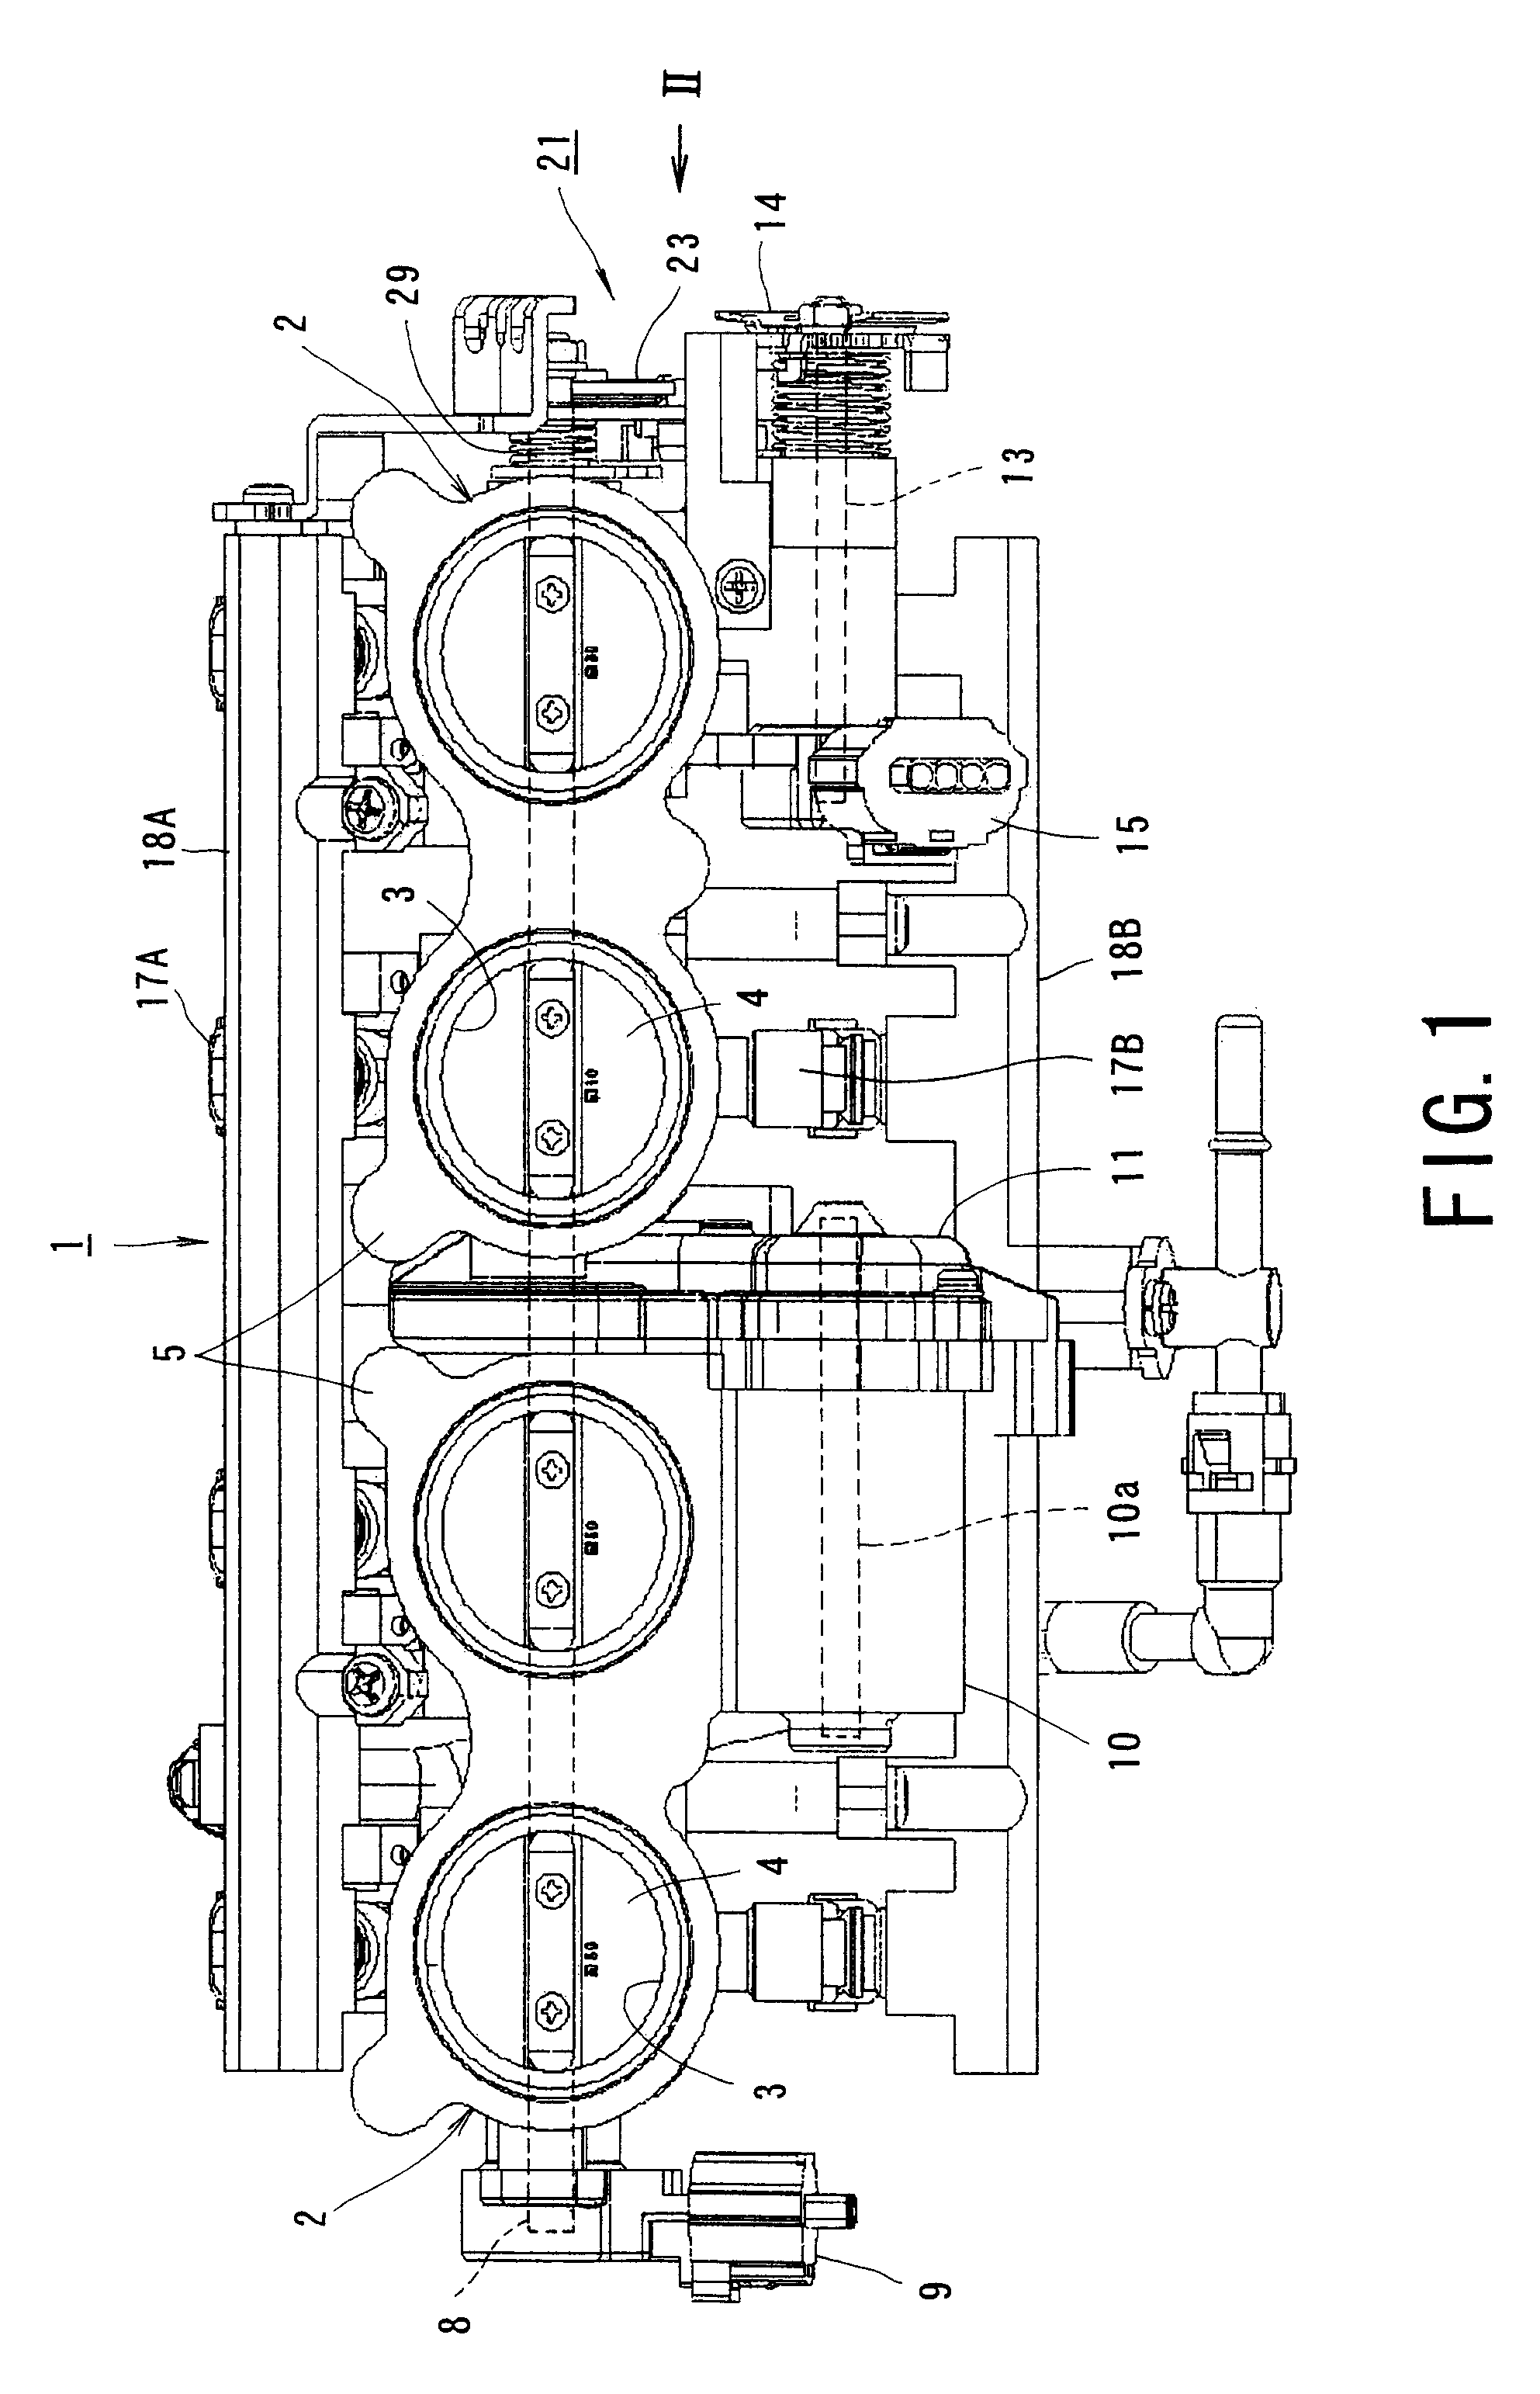 Electronically controlled throttle valve unit